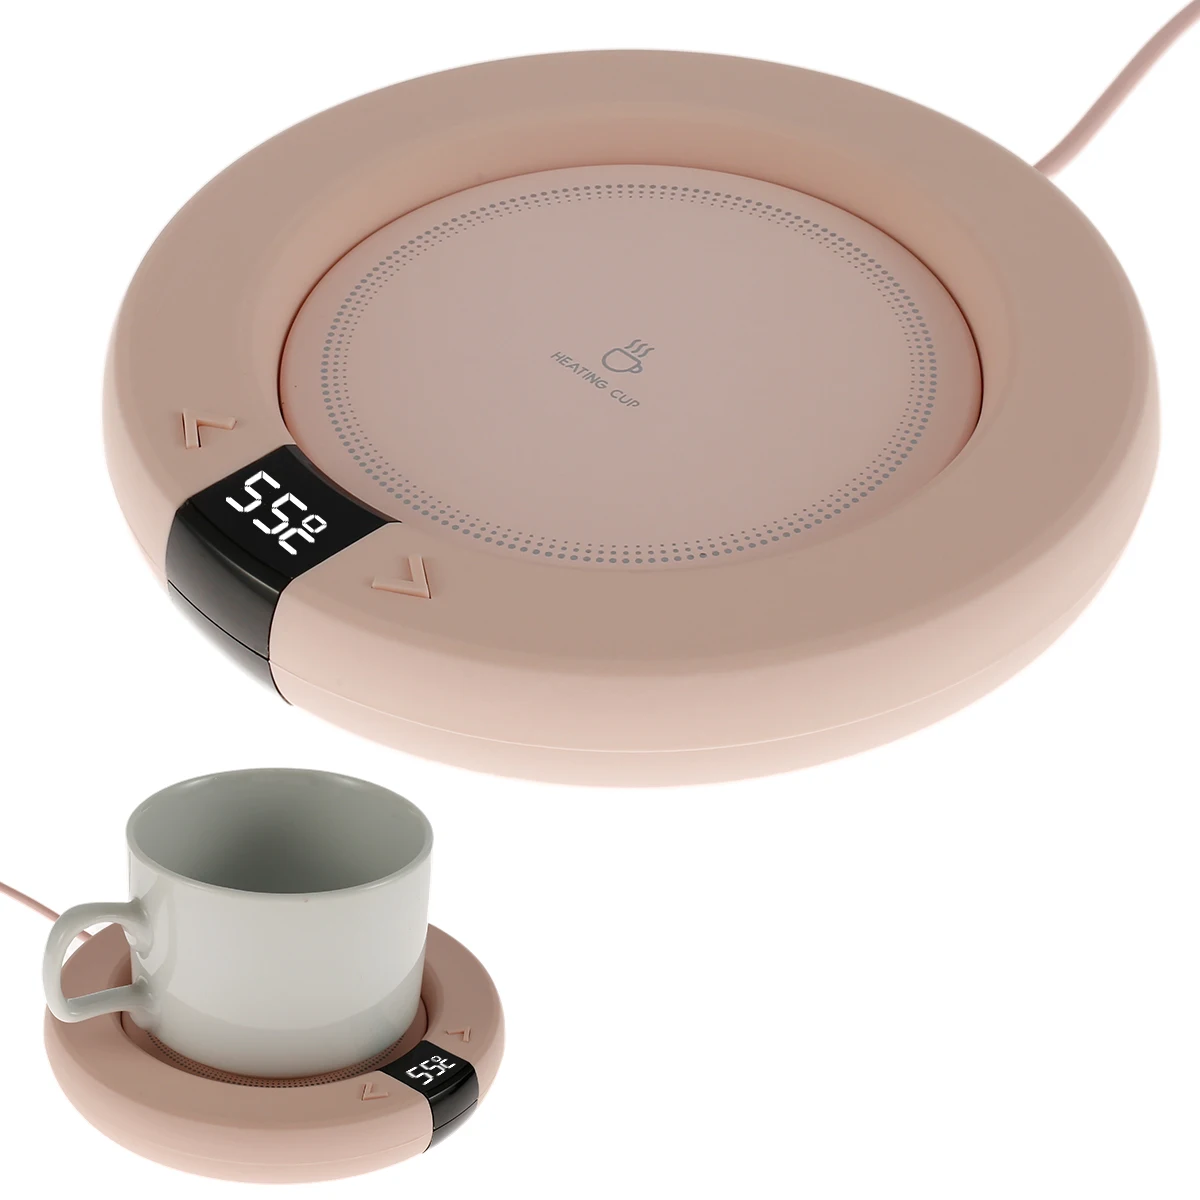 

Smart Beverage Cup Warmer Electric Coffee Cup Warmer Coaster 3 Temperatures LED Display for Tea Milk Water Drinks Maker Heater